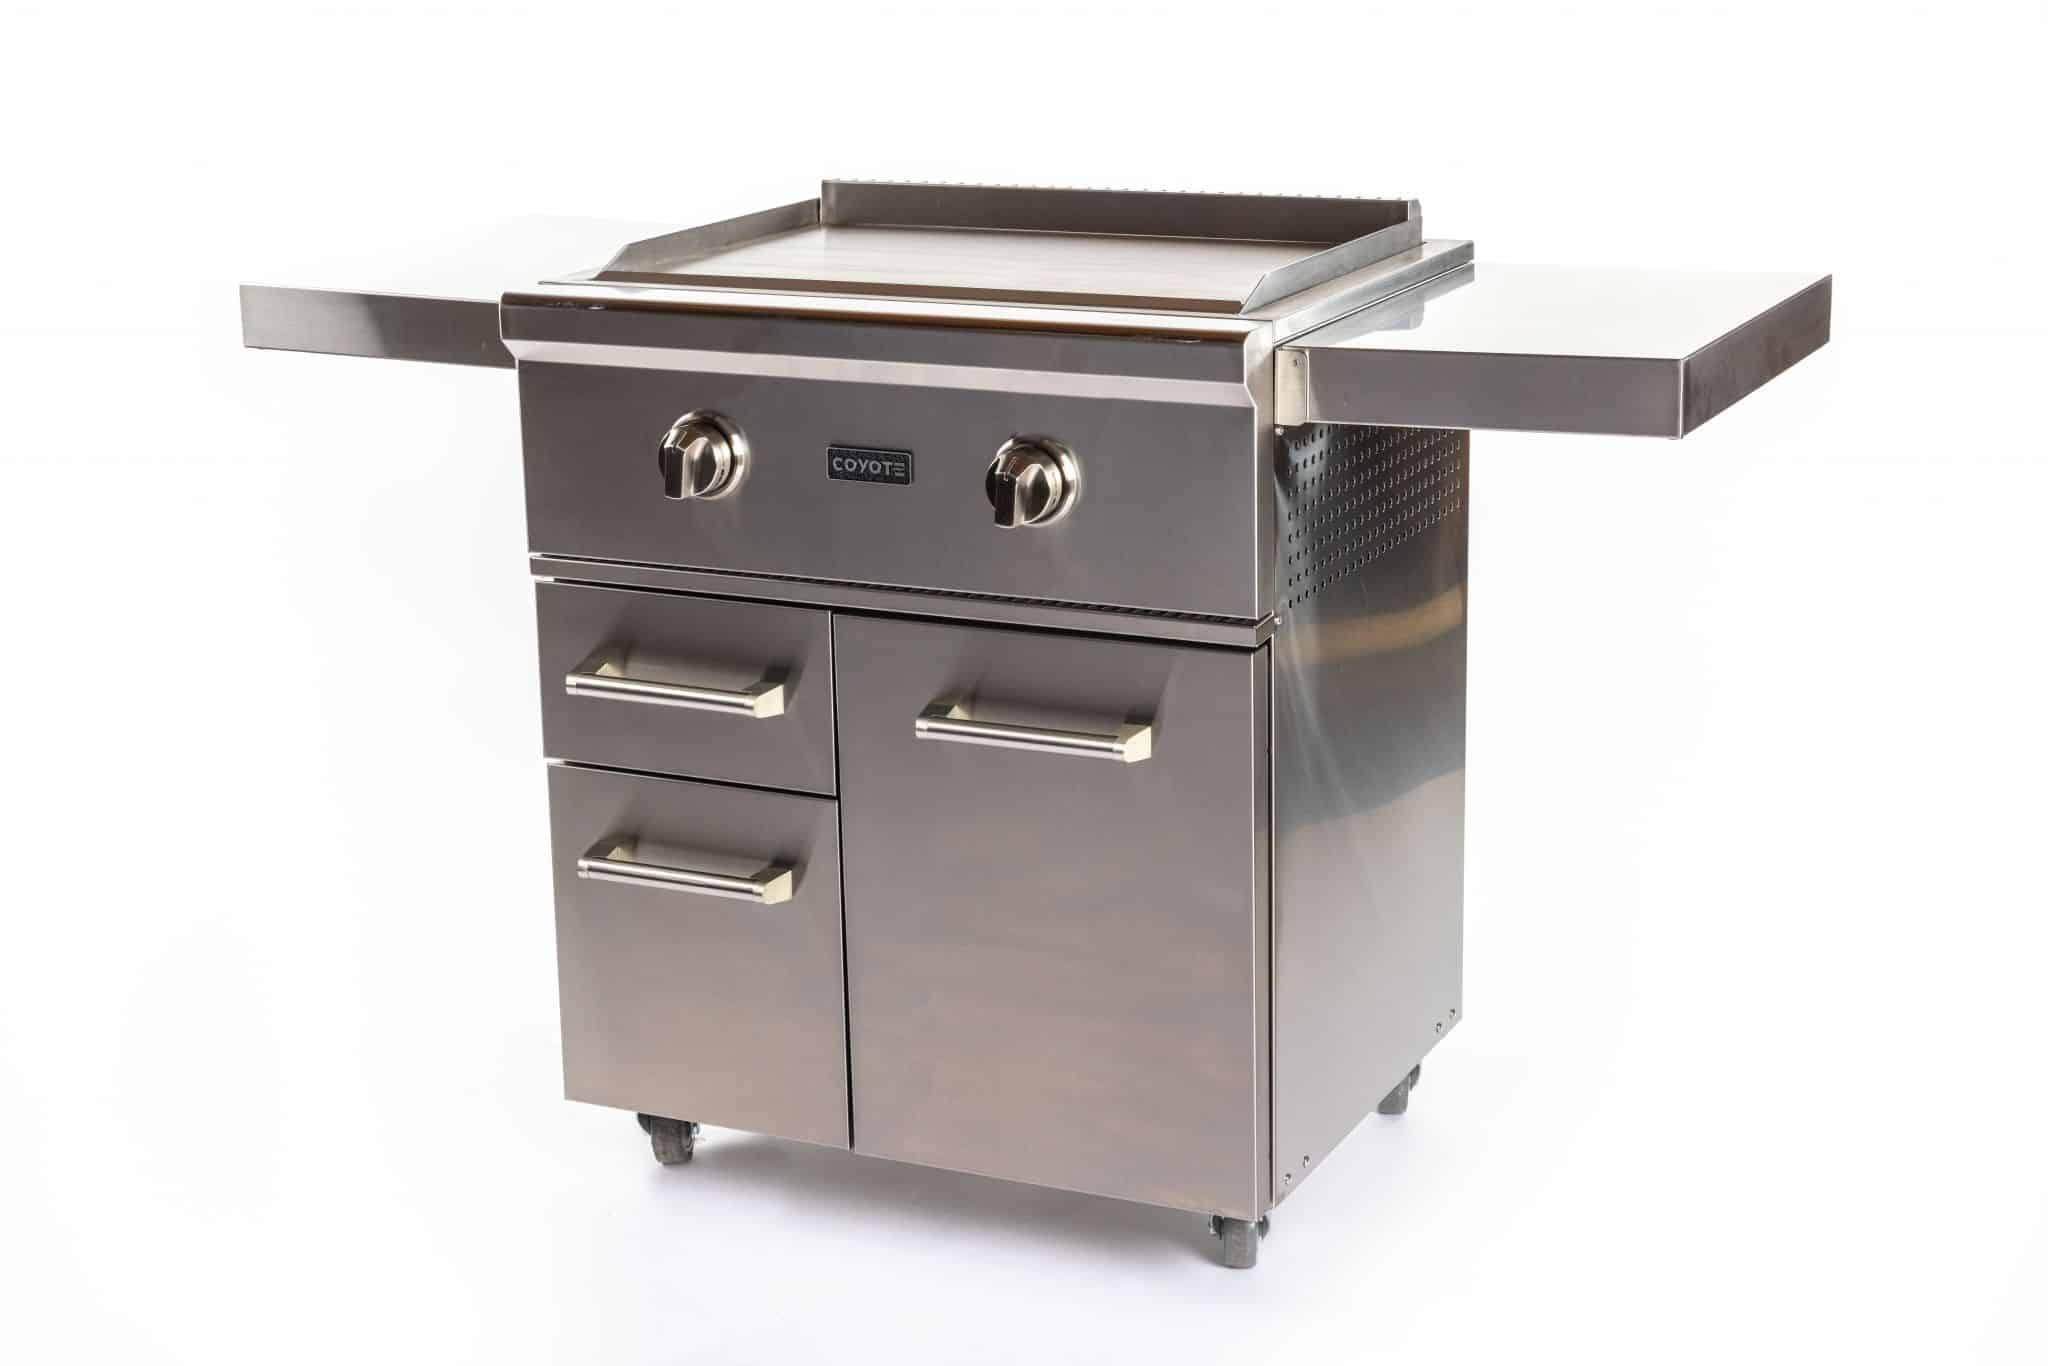 30" Flat Top Grill Built-in; LP